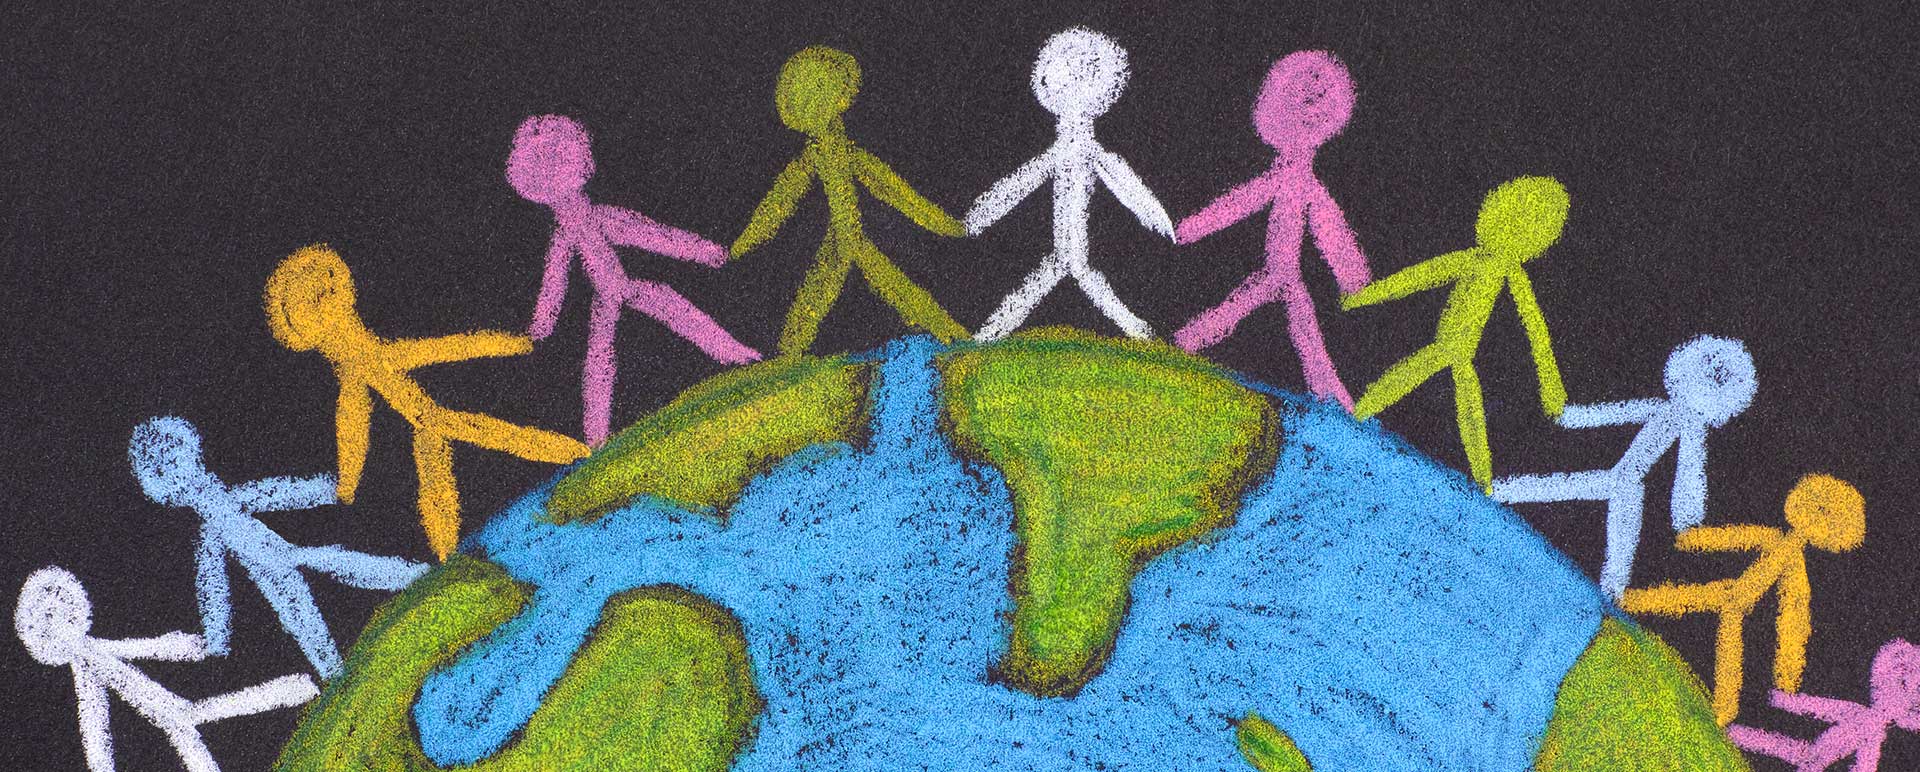 Crayon drawing of children holding hands around a globe